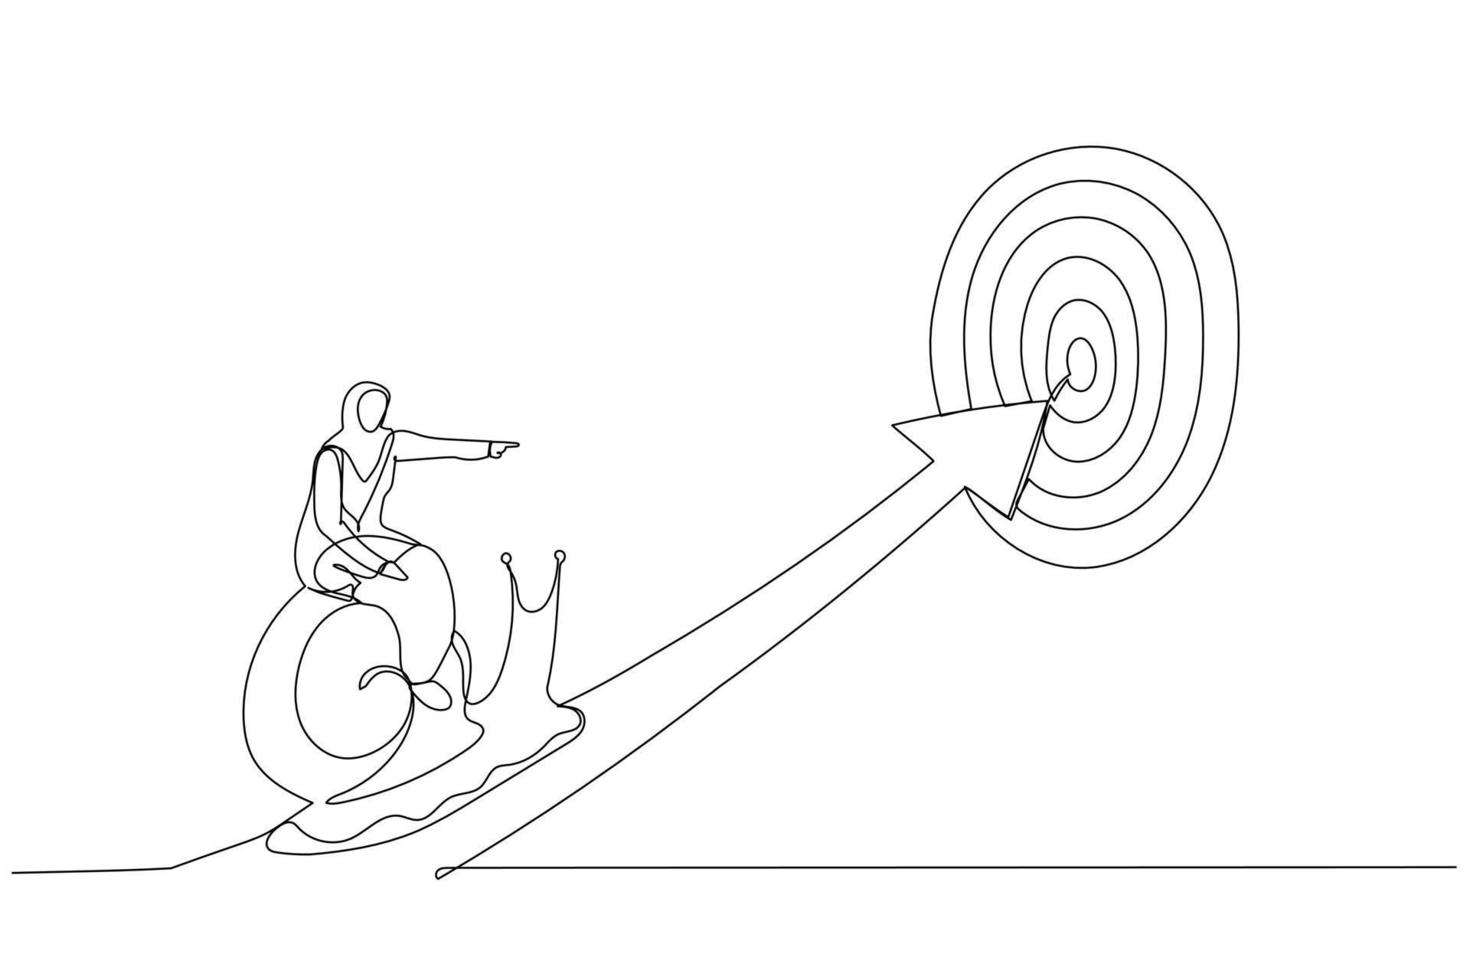 Cartoon of tried muslim businesswoman riding snail slow walking on arrow to reach target. Metaphor for slow business progress, laziness or procrastination. One continuous line art style vector